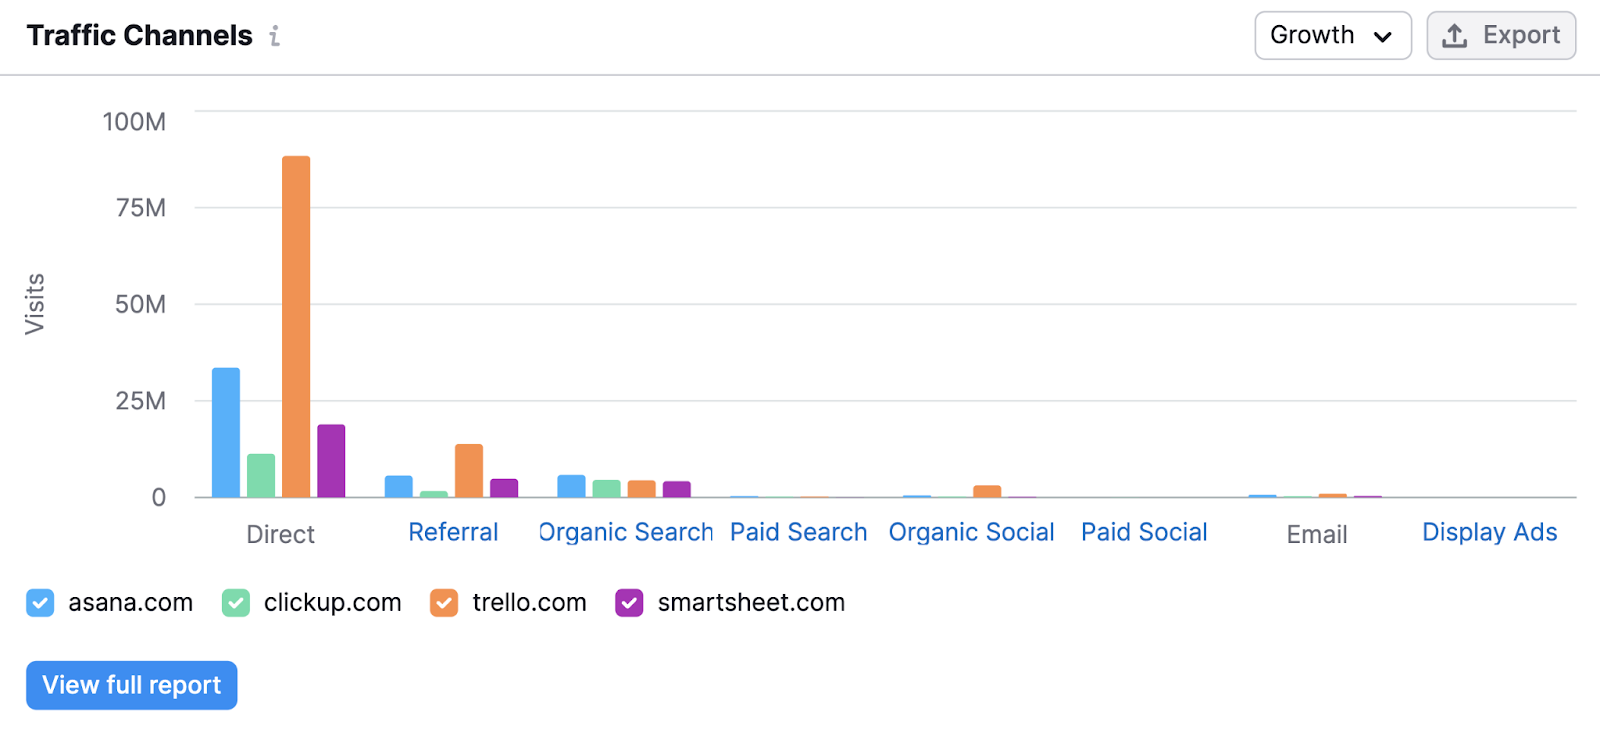 A breakdown of postulation   channels for Asana, ClickUp, Trello, and Smartsheet successful  Traffic Analytics tool